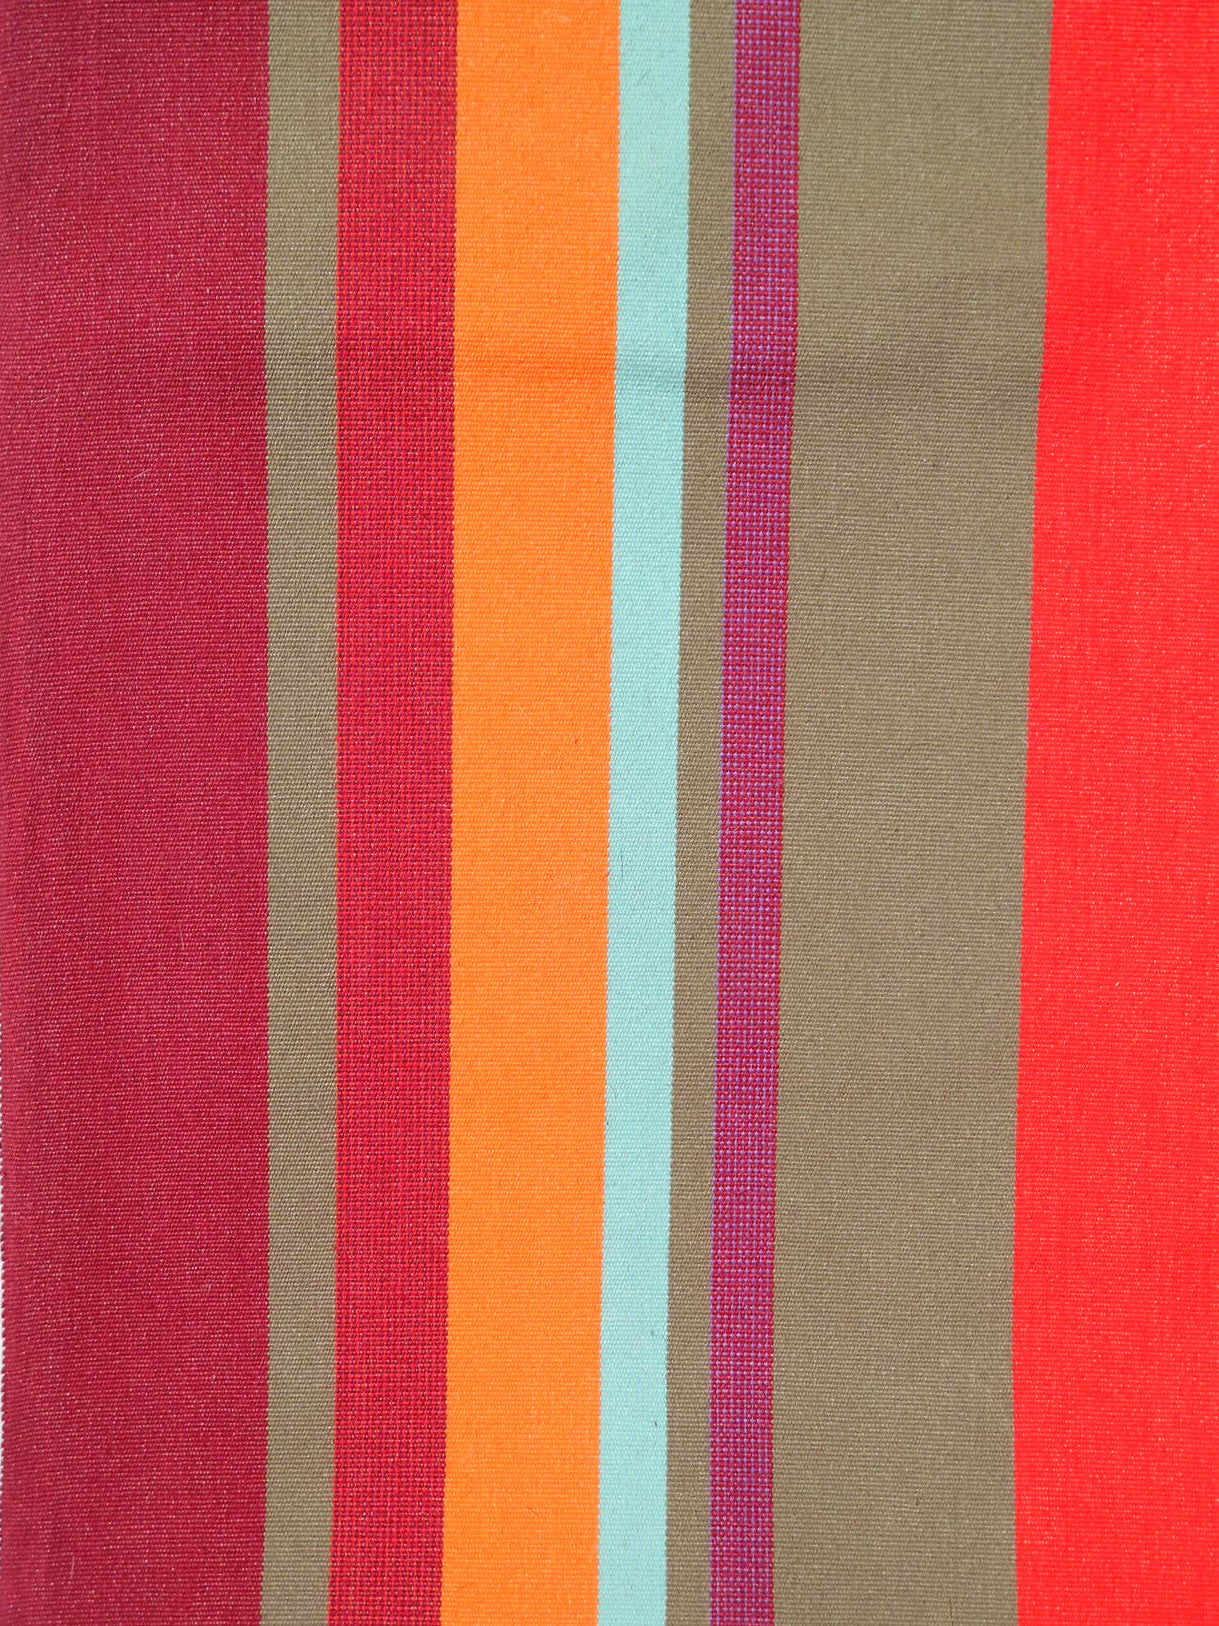 French Cotton Canvas Striped Textile Red